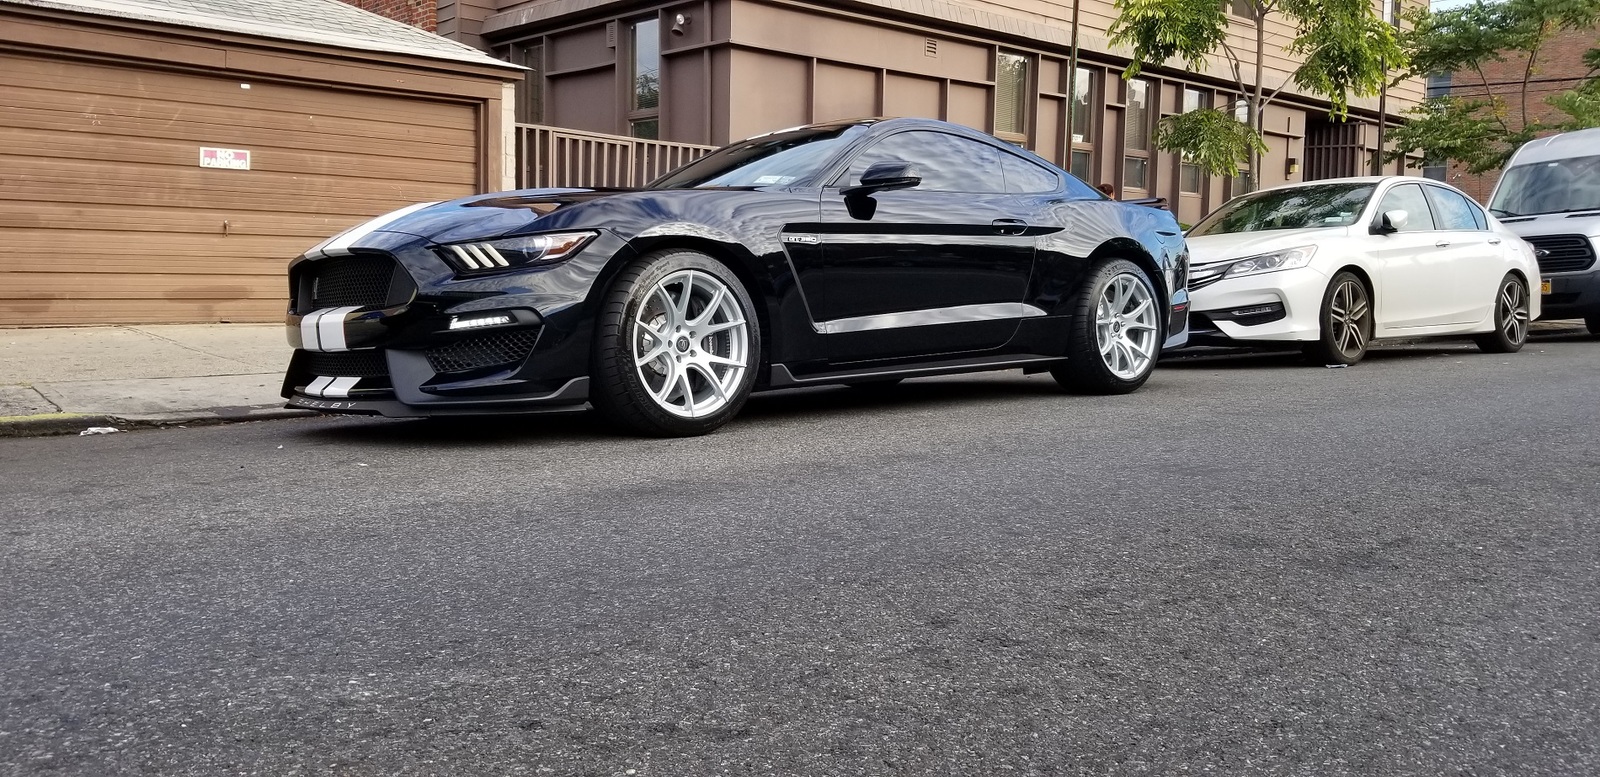 dow-black-ford-mustang-shelby-gt350-forgestar-cf5v-brilliant-silver-concave-rotory-forged-wheels.jpg